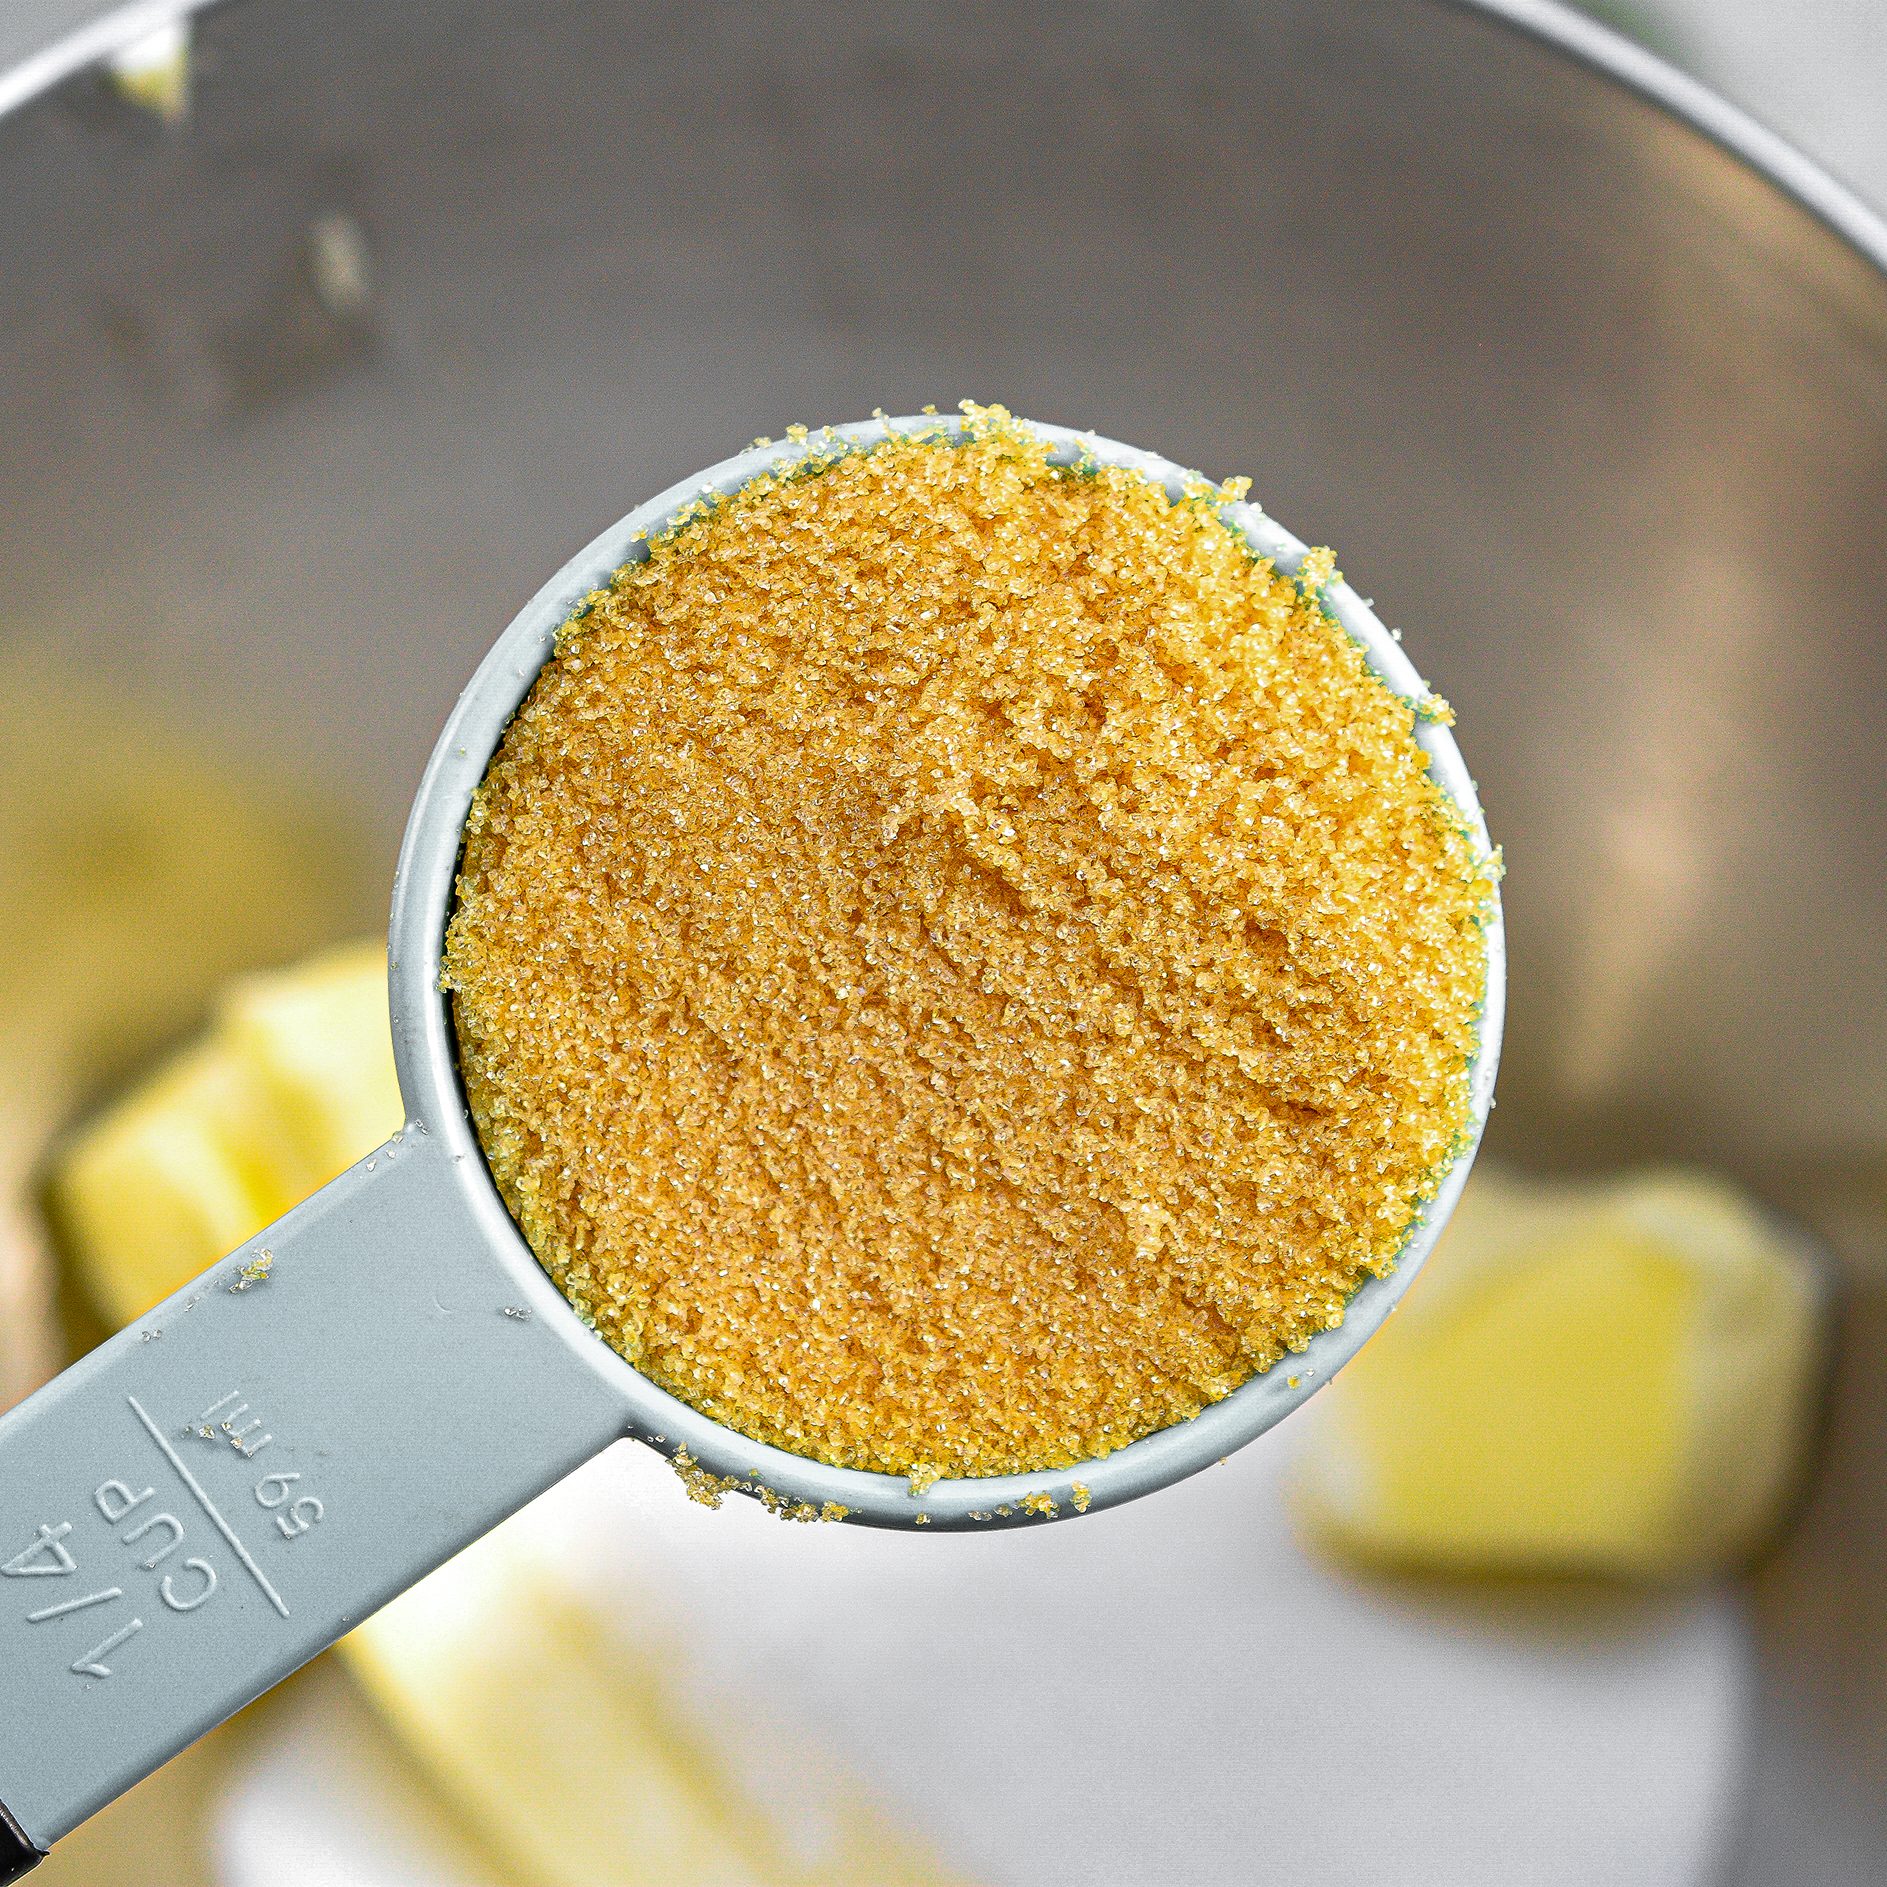 In a mixing bowl, blend together the butter, granulated sugar, brown sugar and vanilla until combined.